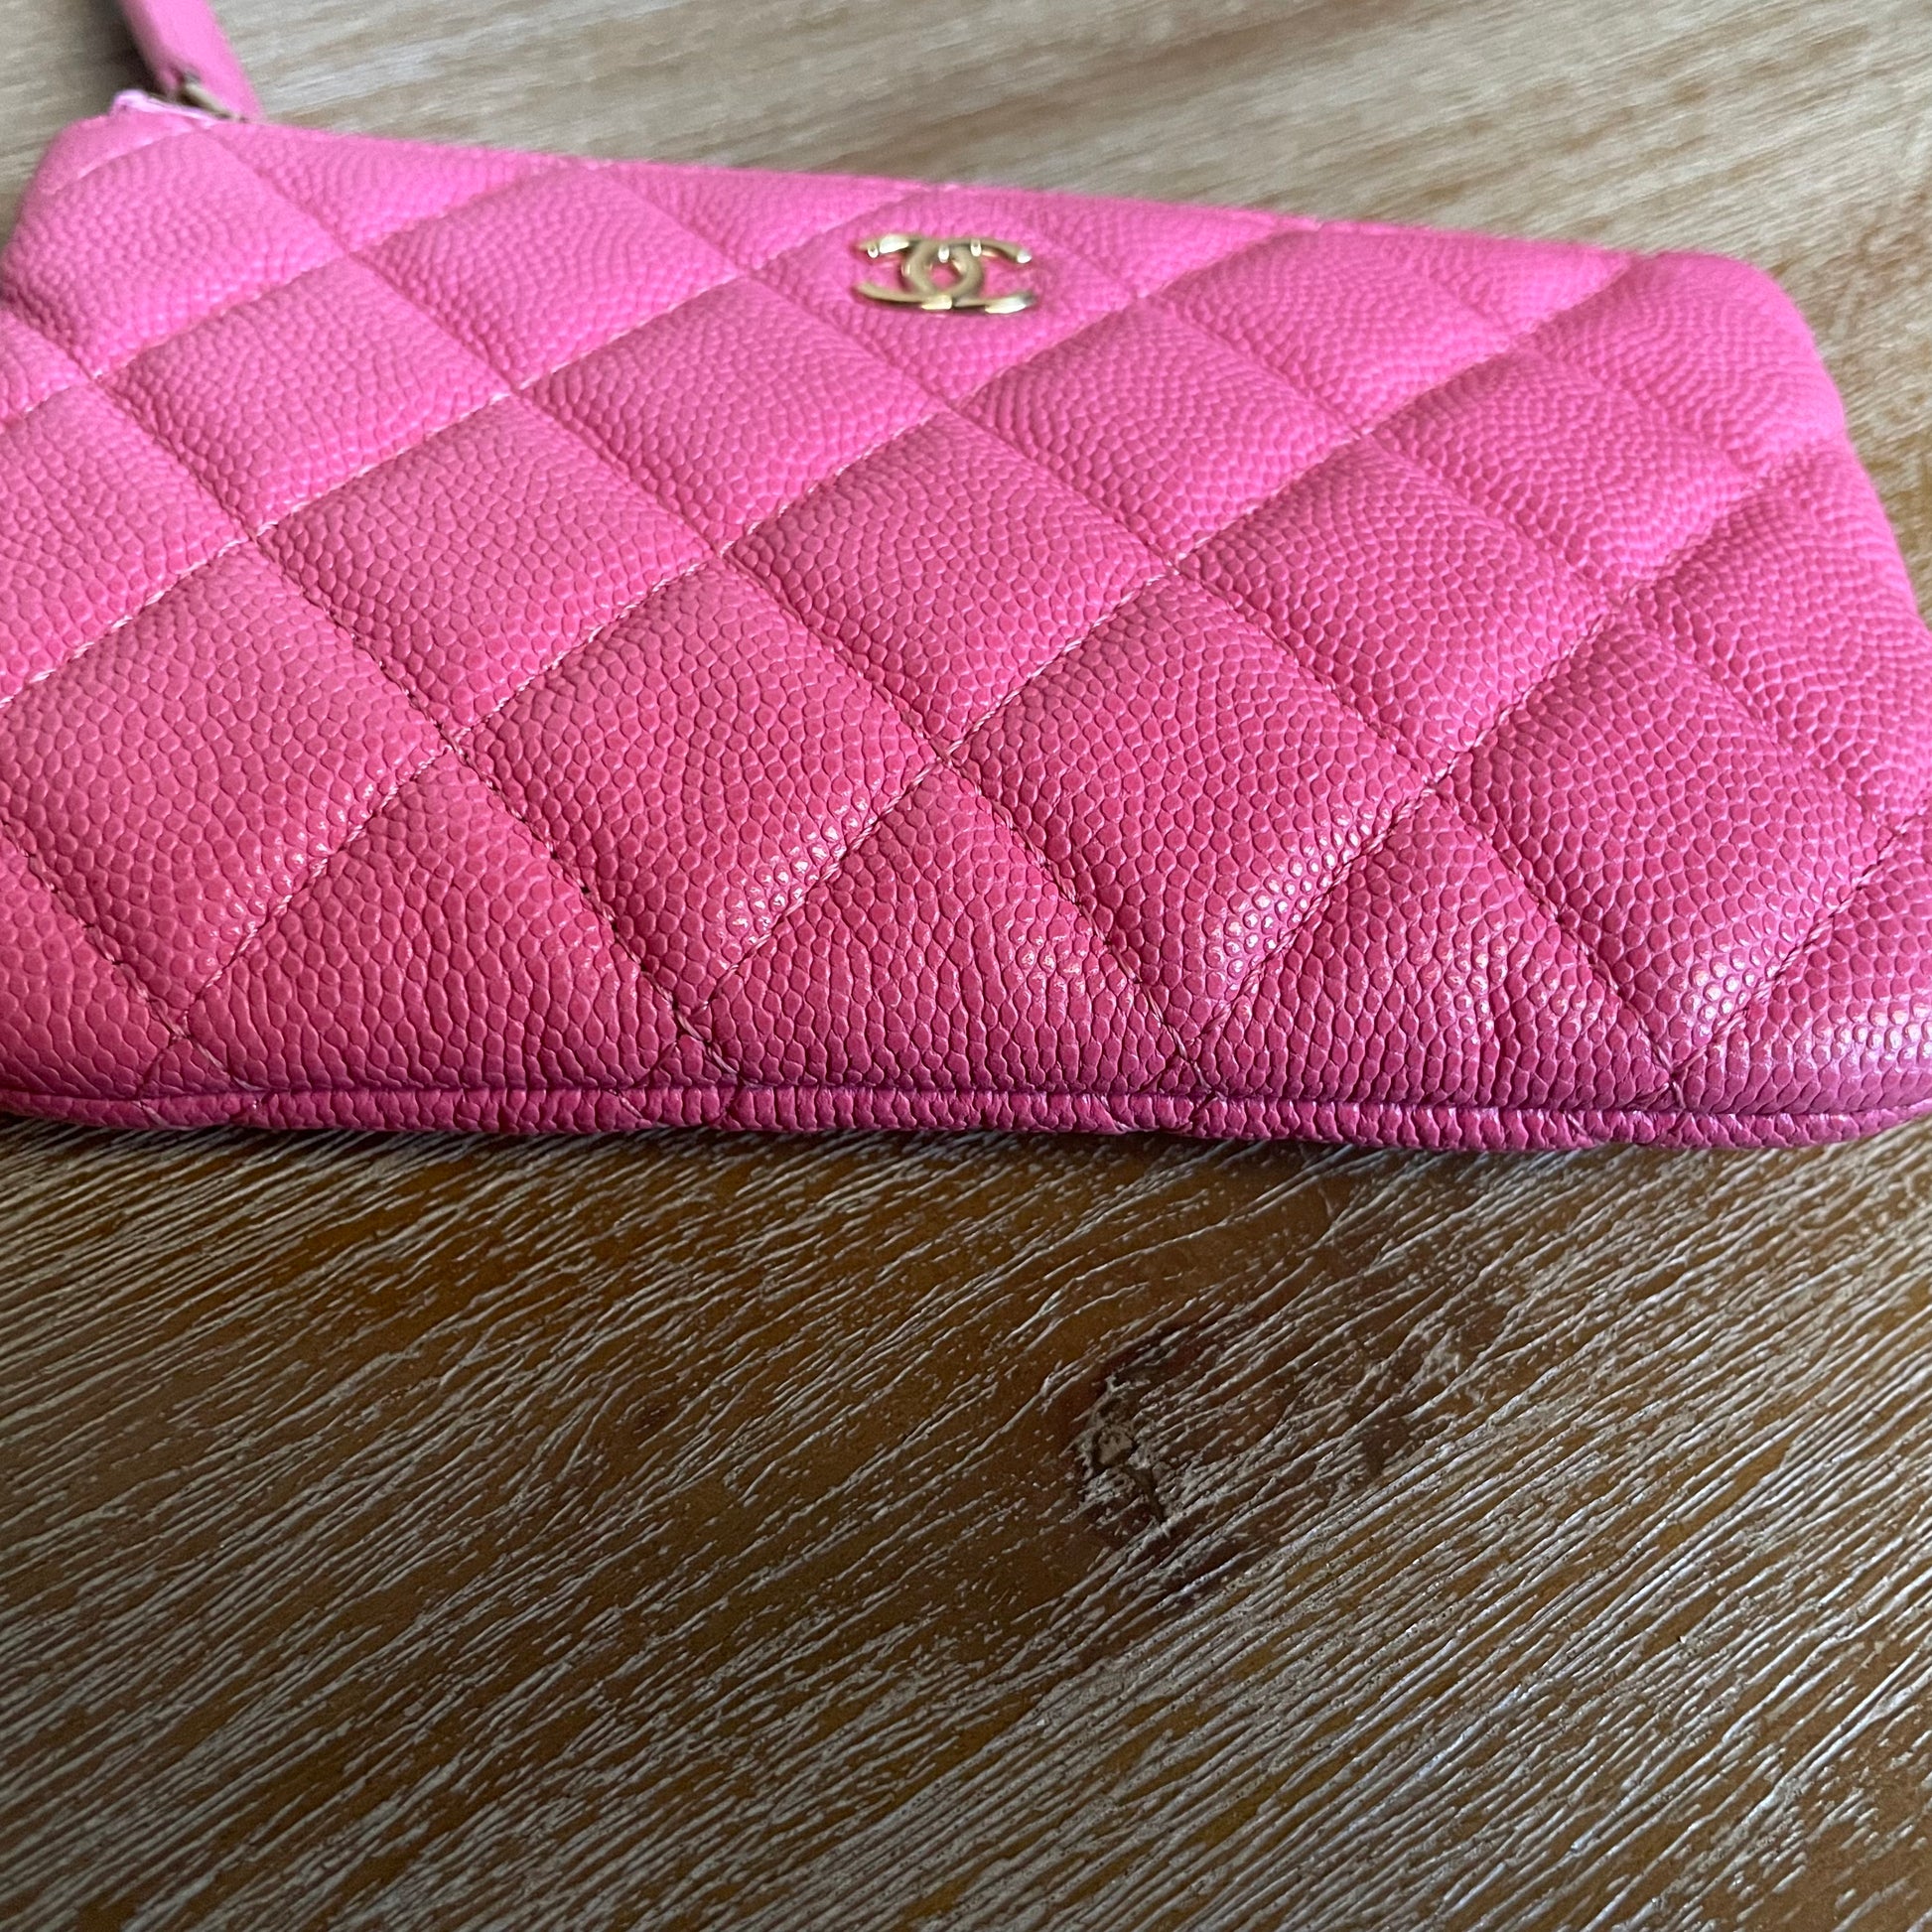 CHANEL Caviar Quilted Small Cosmetic Case Dark Pink 1199704